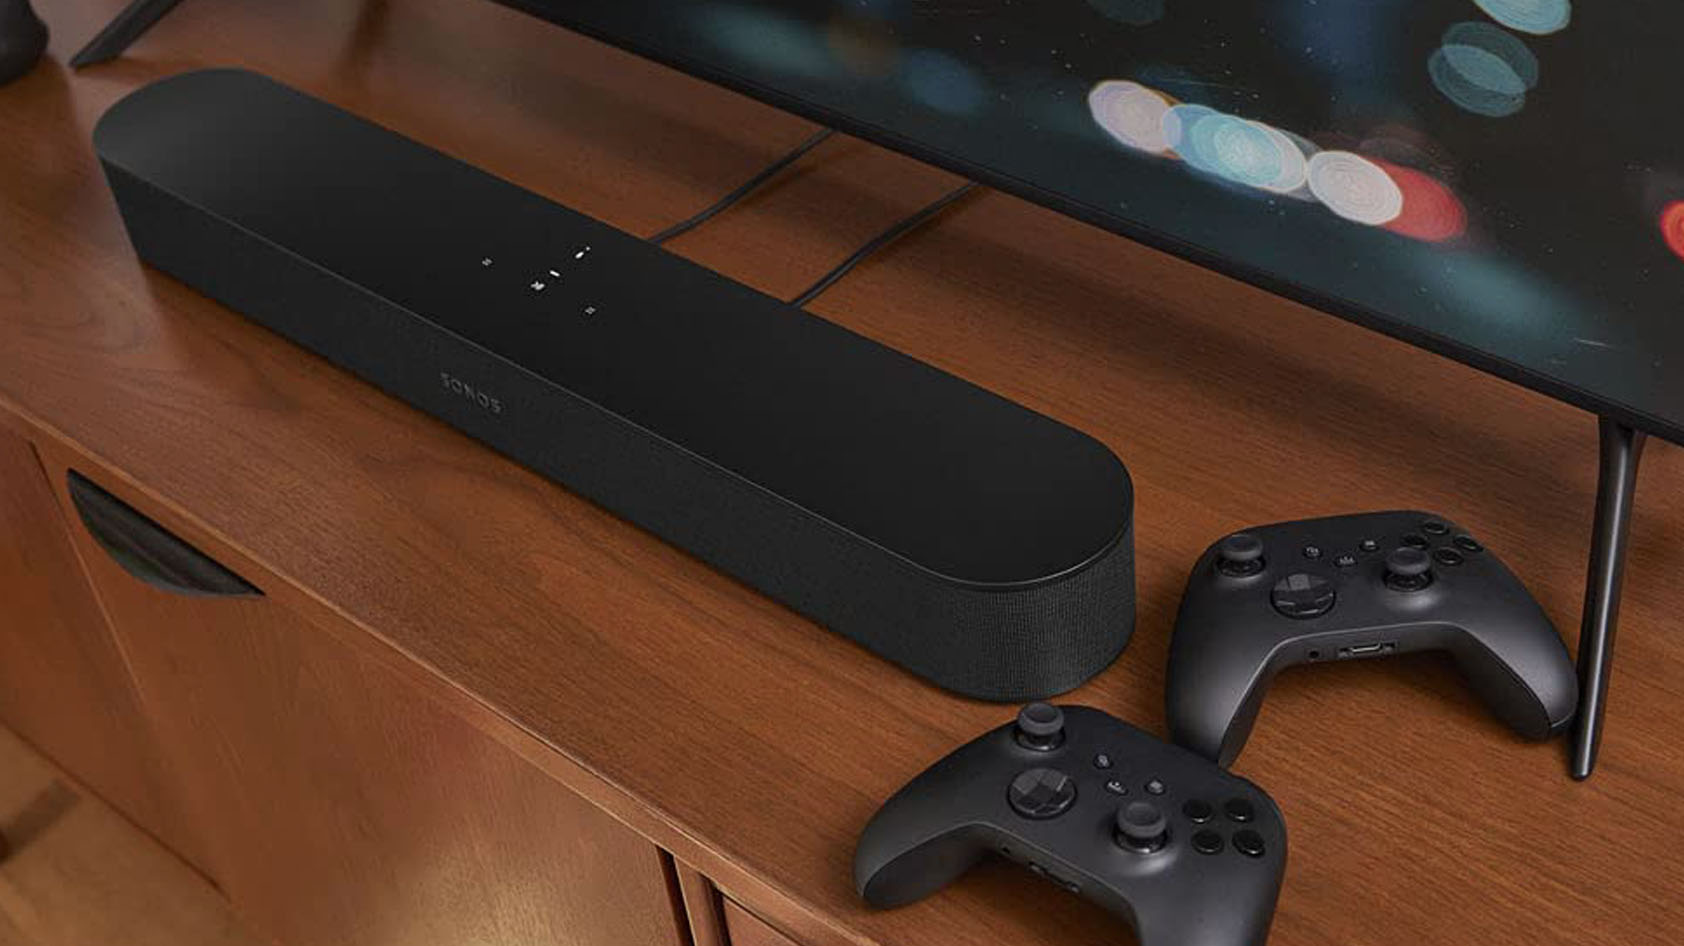 The Sonos Beam (Gen 2) soundbar rests on a wooden TV stand next to two Xbox controllers.